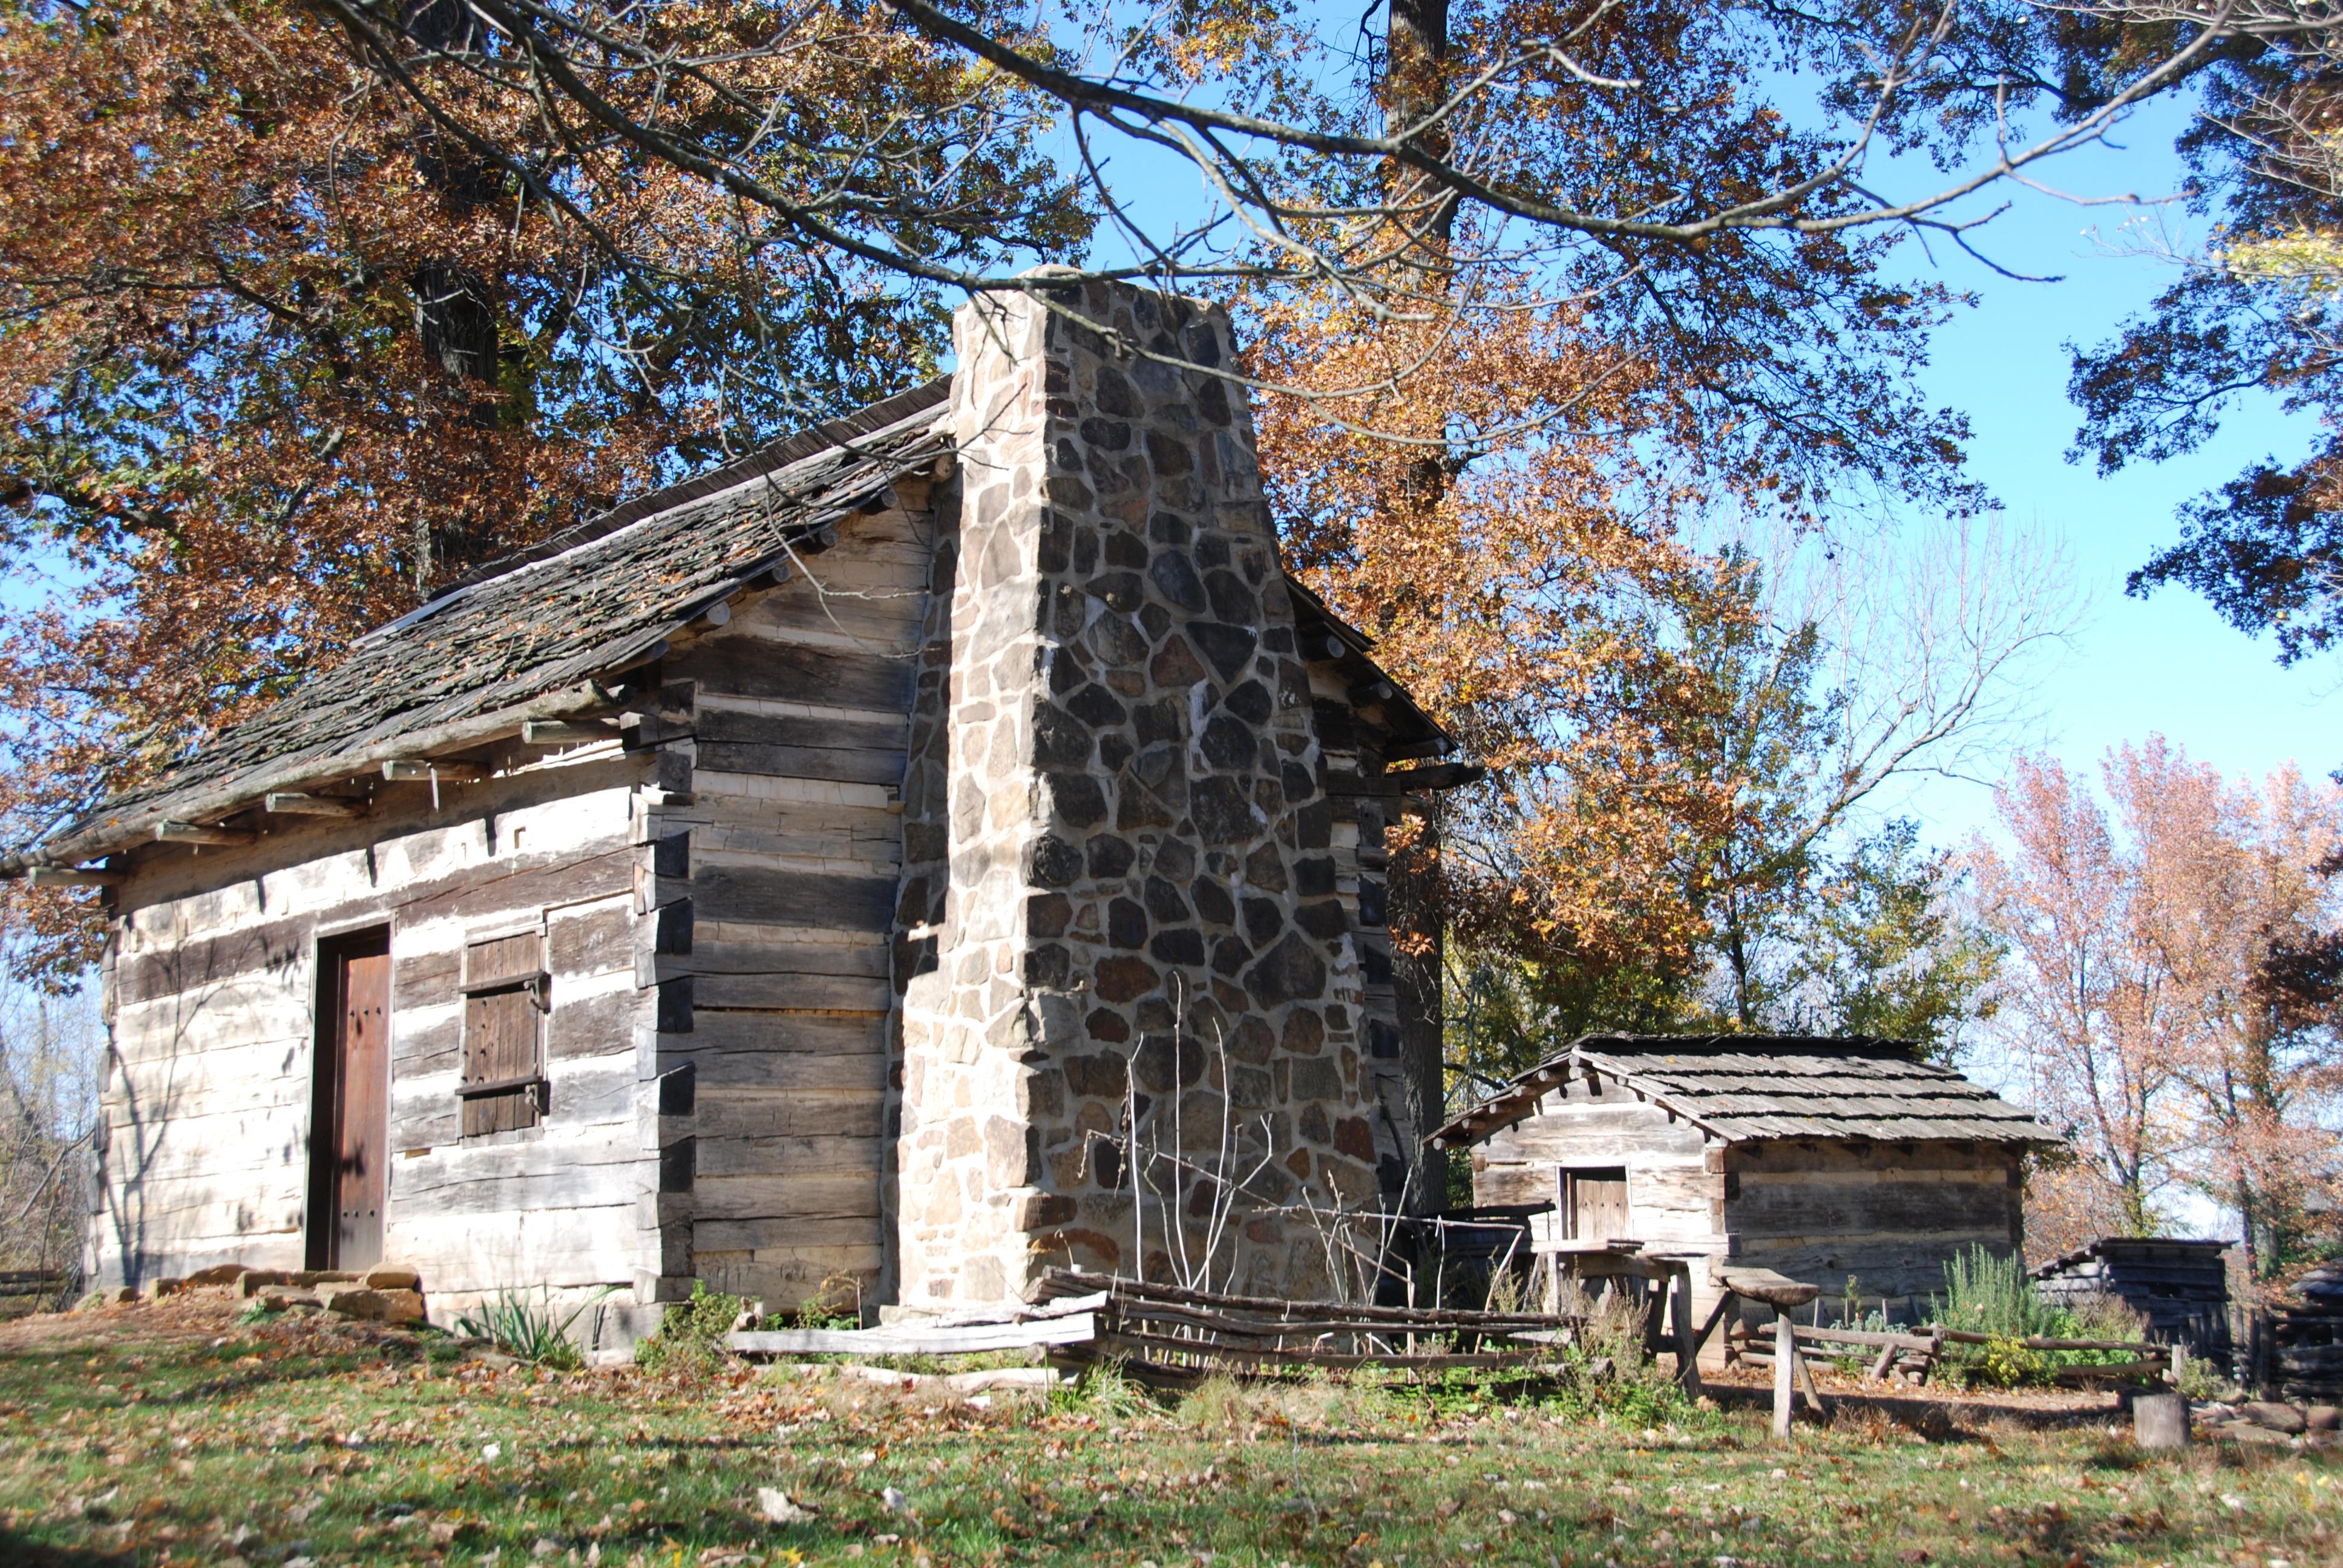 Cabin and smokehouse in the fall